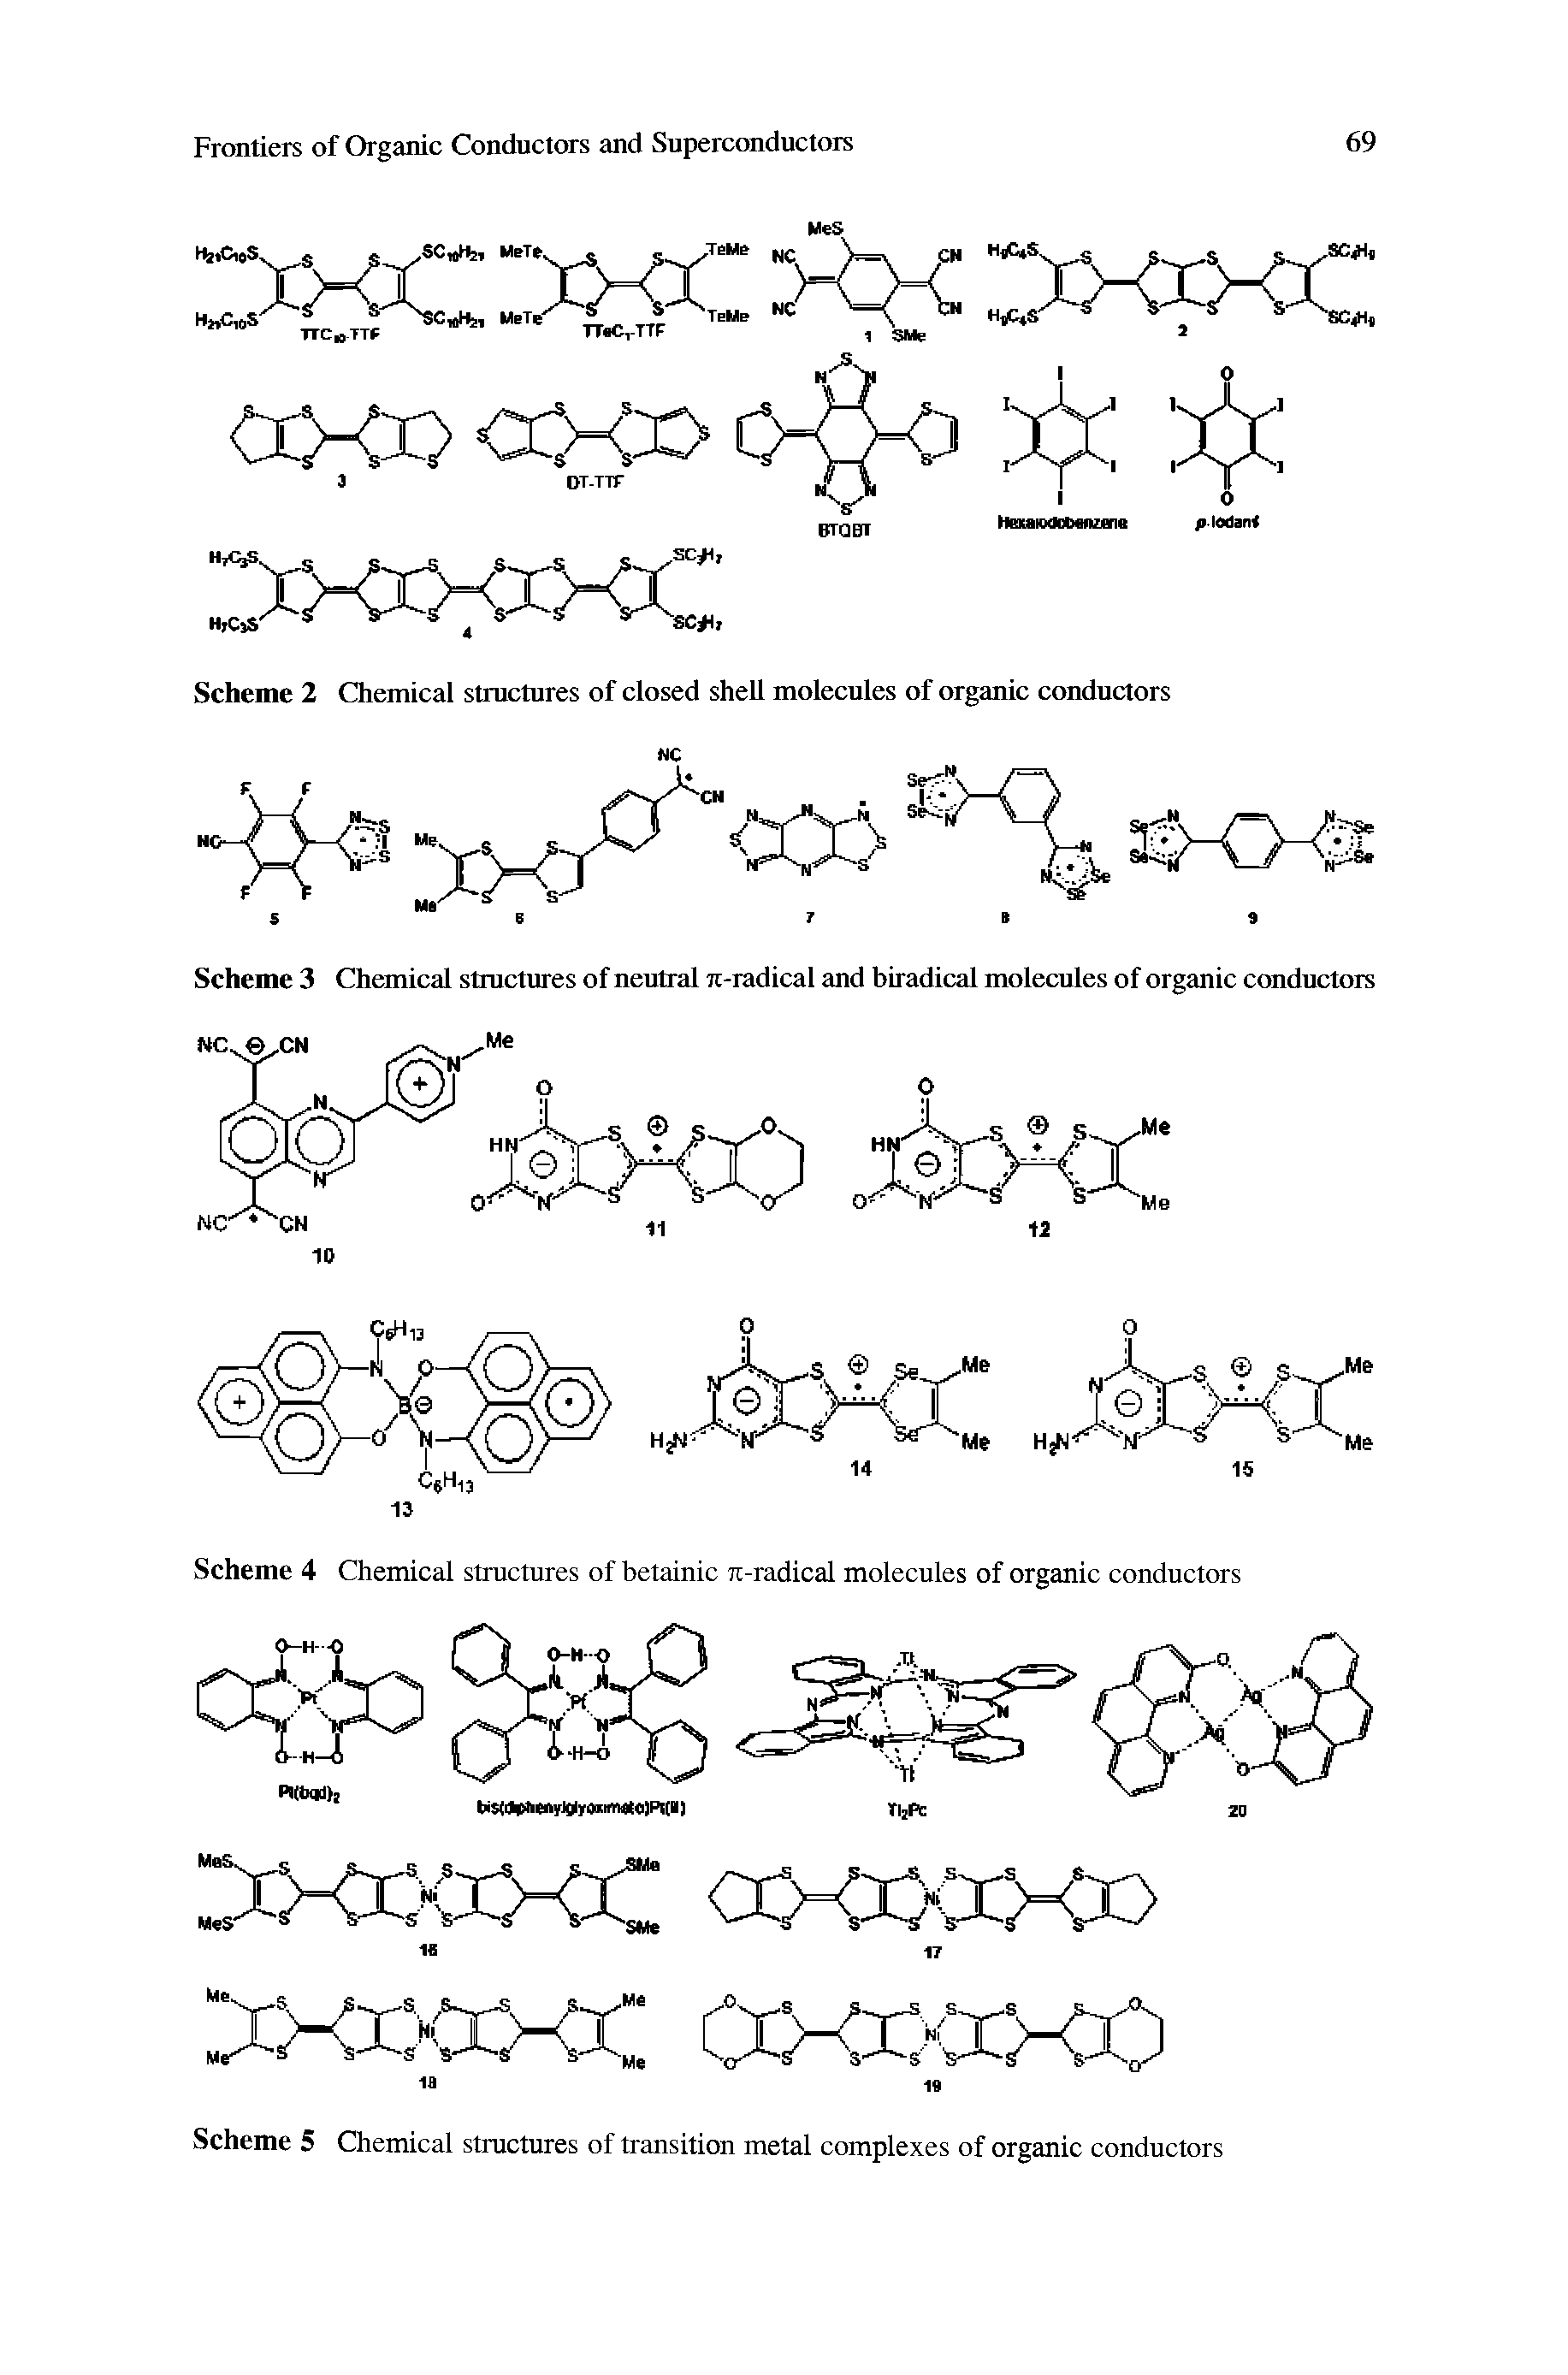 Scheme 4 Chemical structures of betainic 7t-radical molecules of organic conductors...